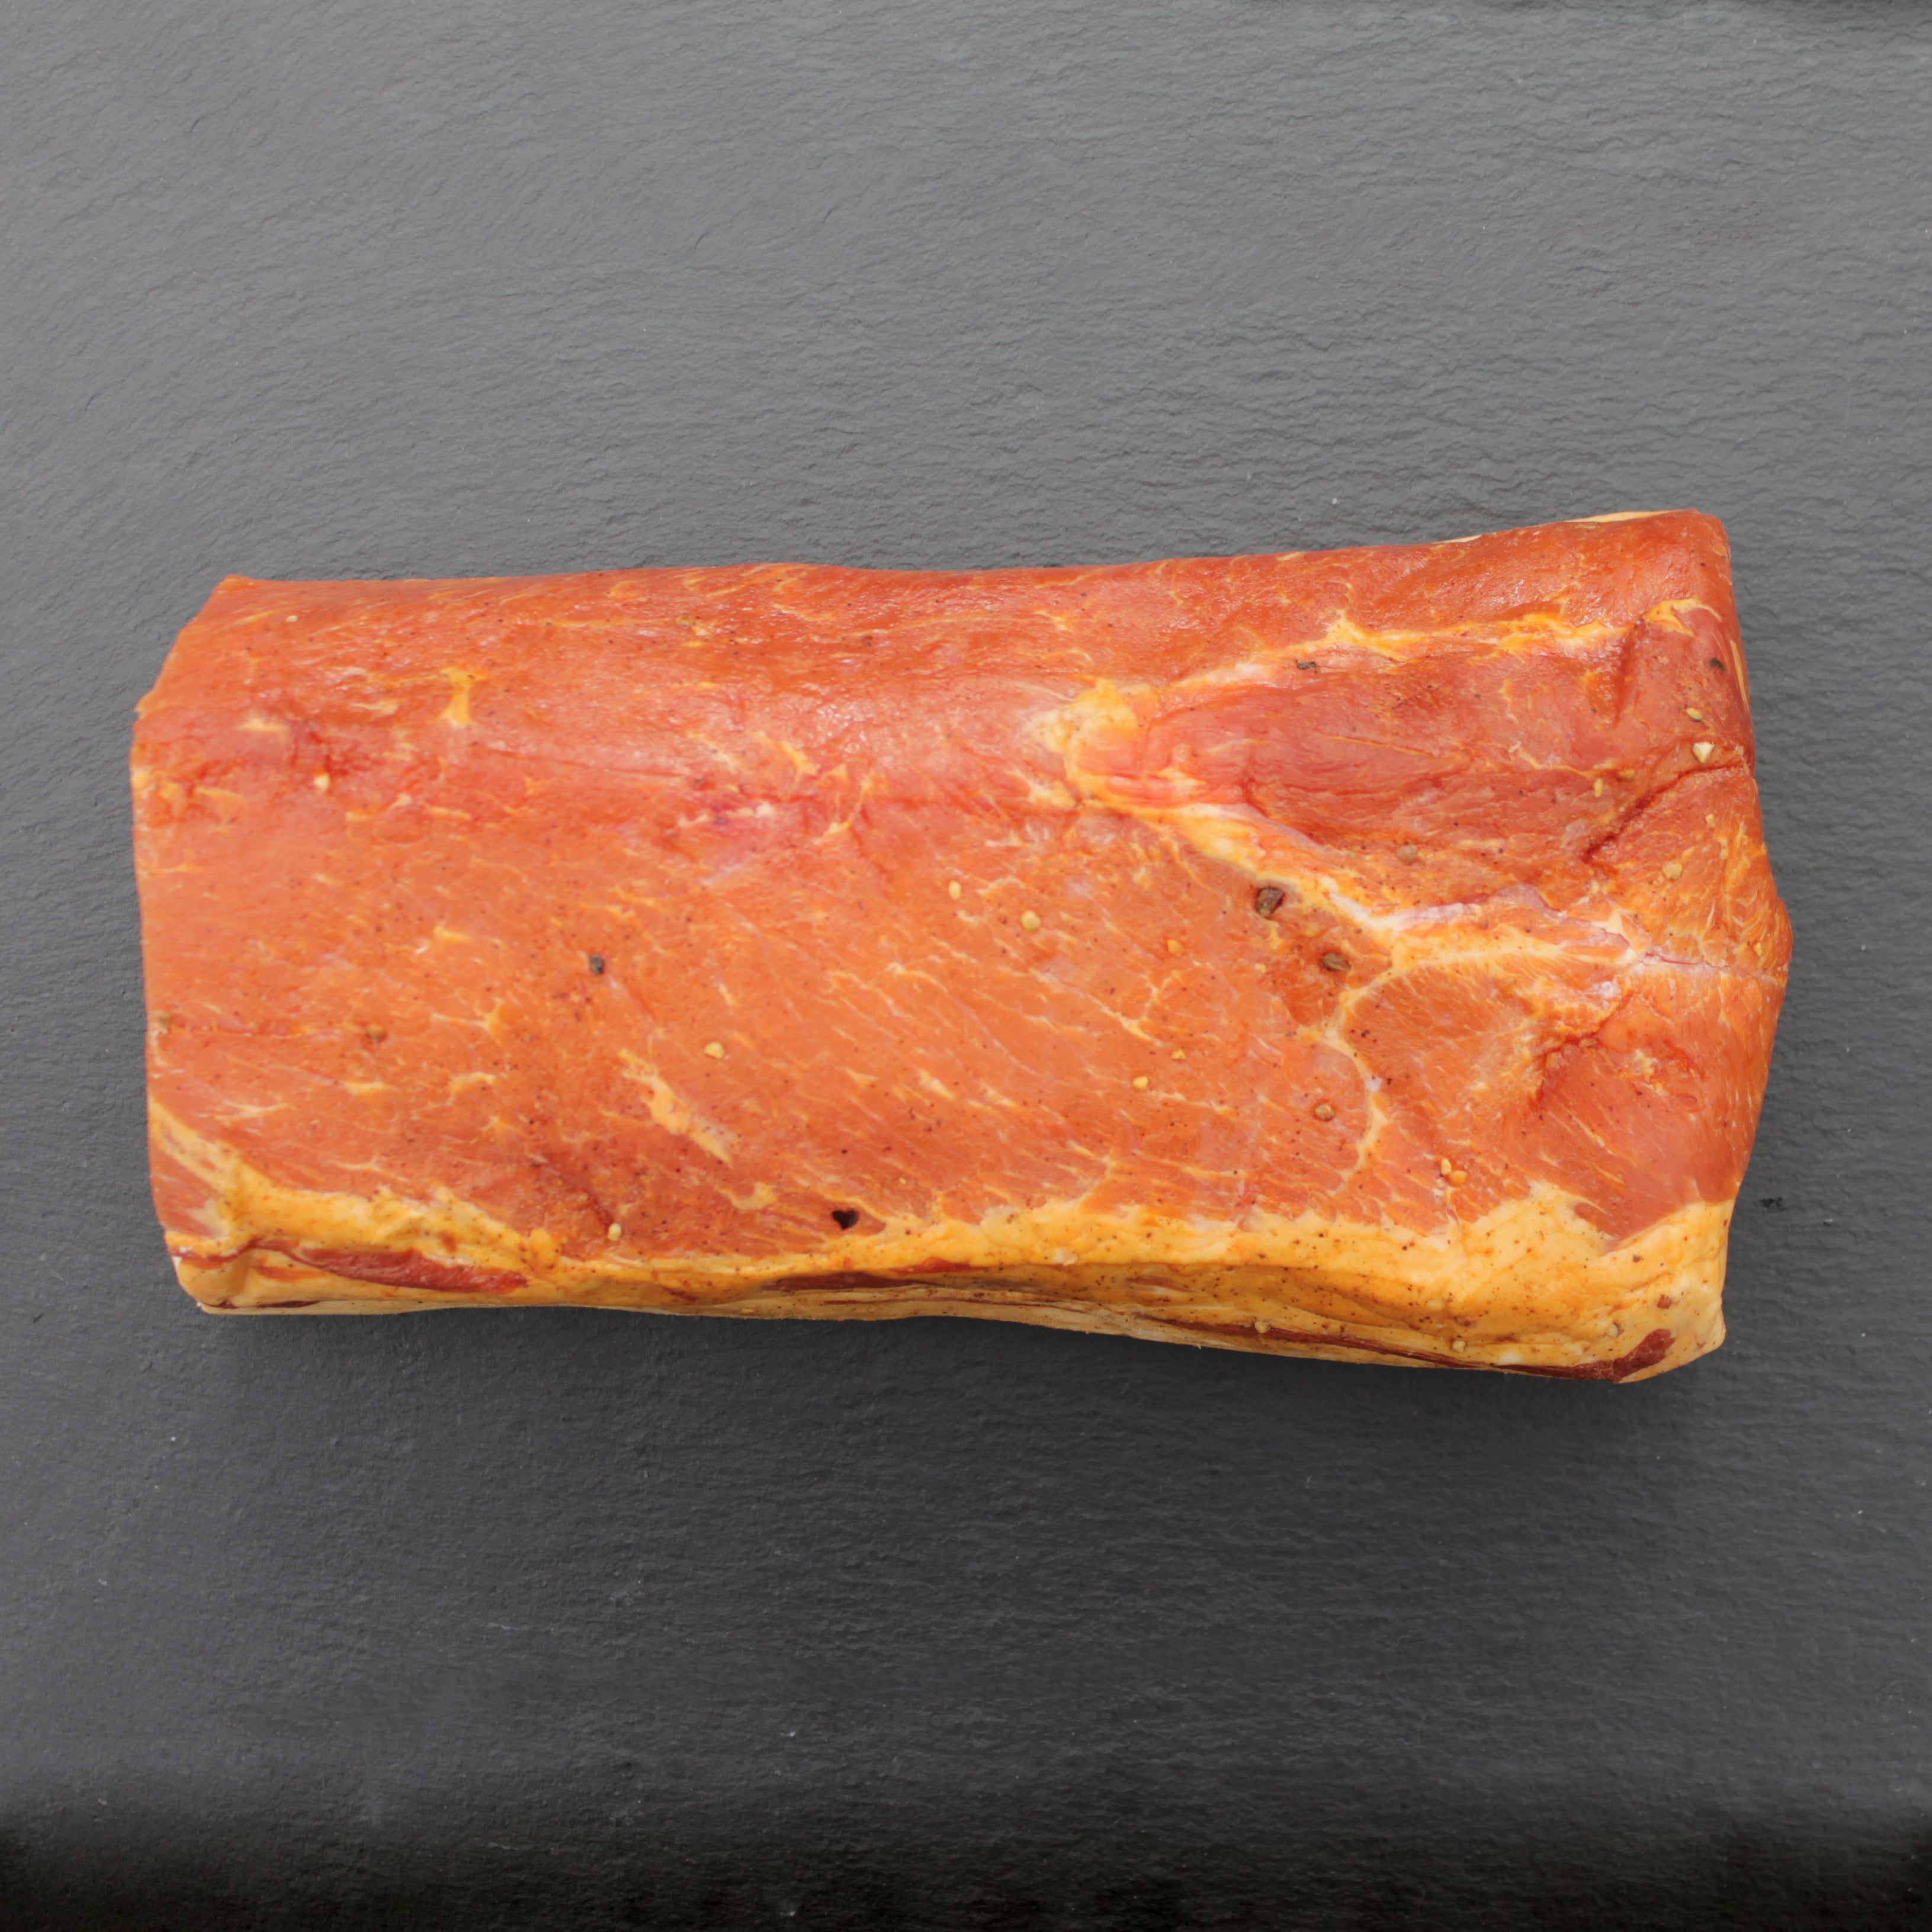 Bacon Overload - 5 kg chunky bacon, smoked or unsmoked